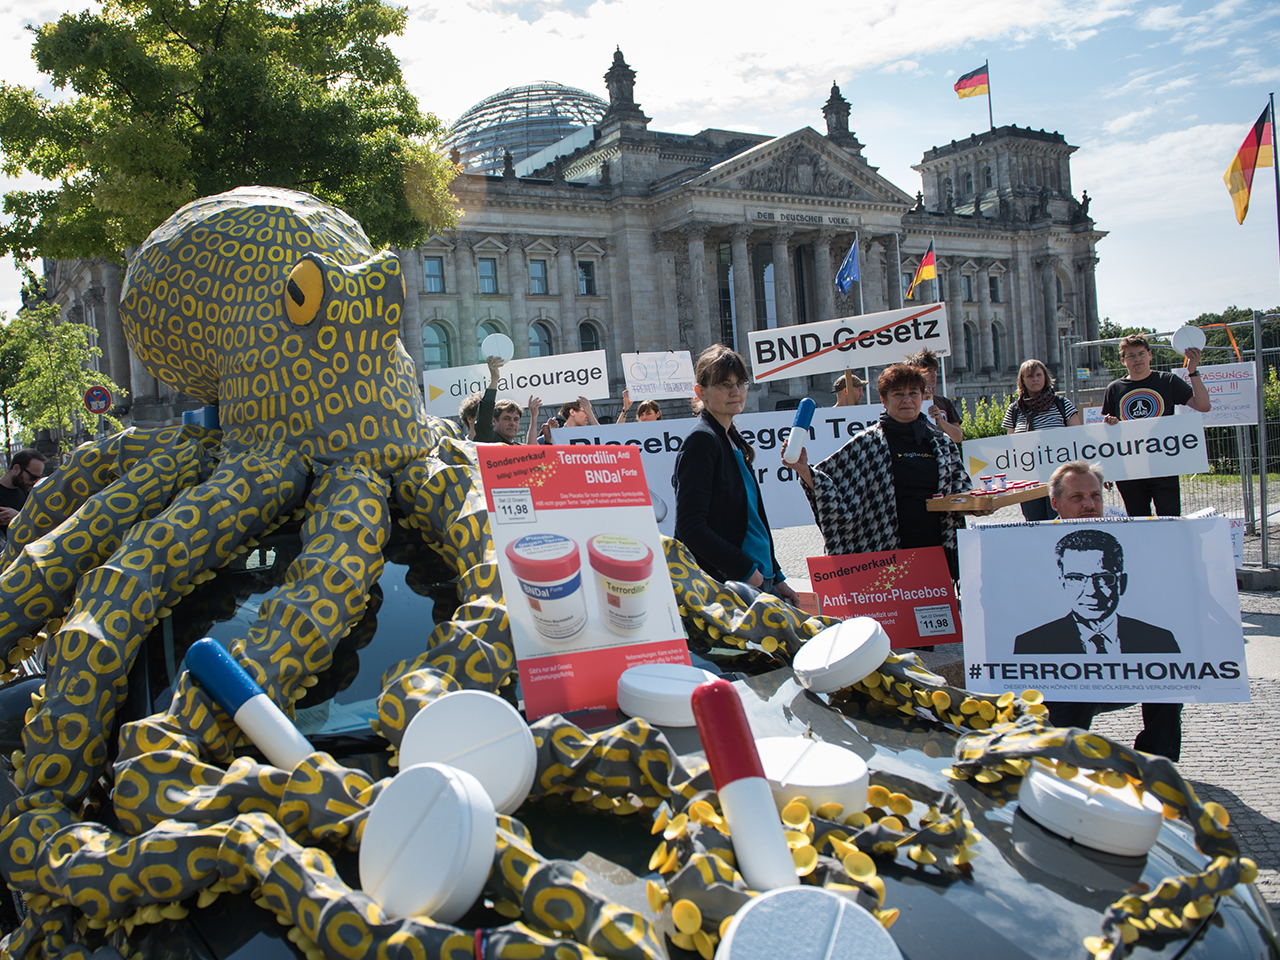 Protesters with the "data octopus" and placebo pills made from paper mache in front of the Berlin Bundestag